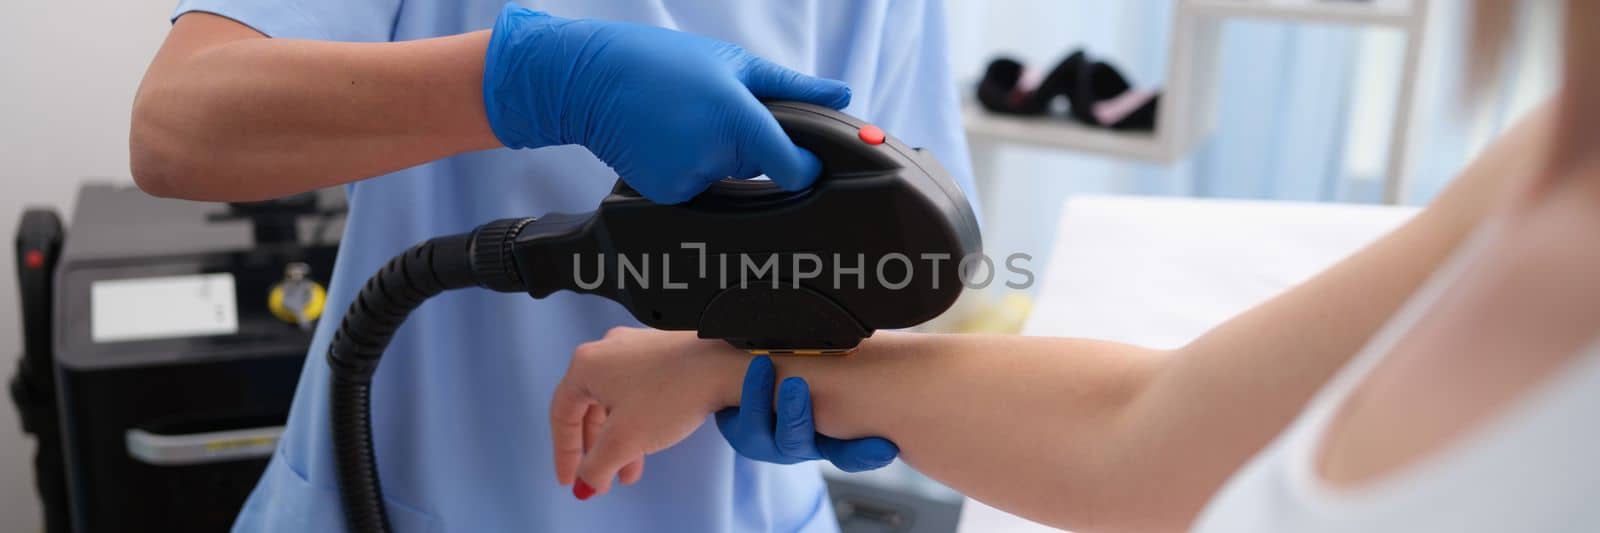 Laser hair removal on female arm in beauty parlor by kuprevich